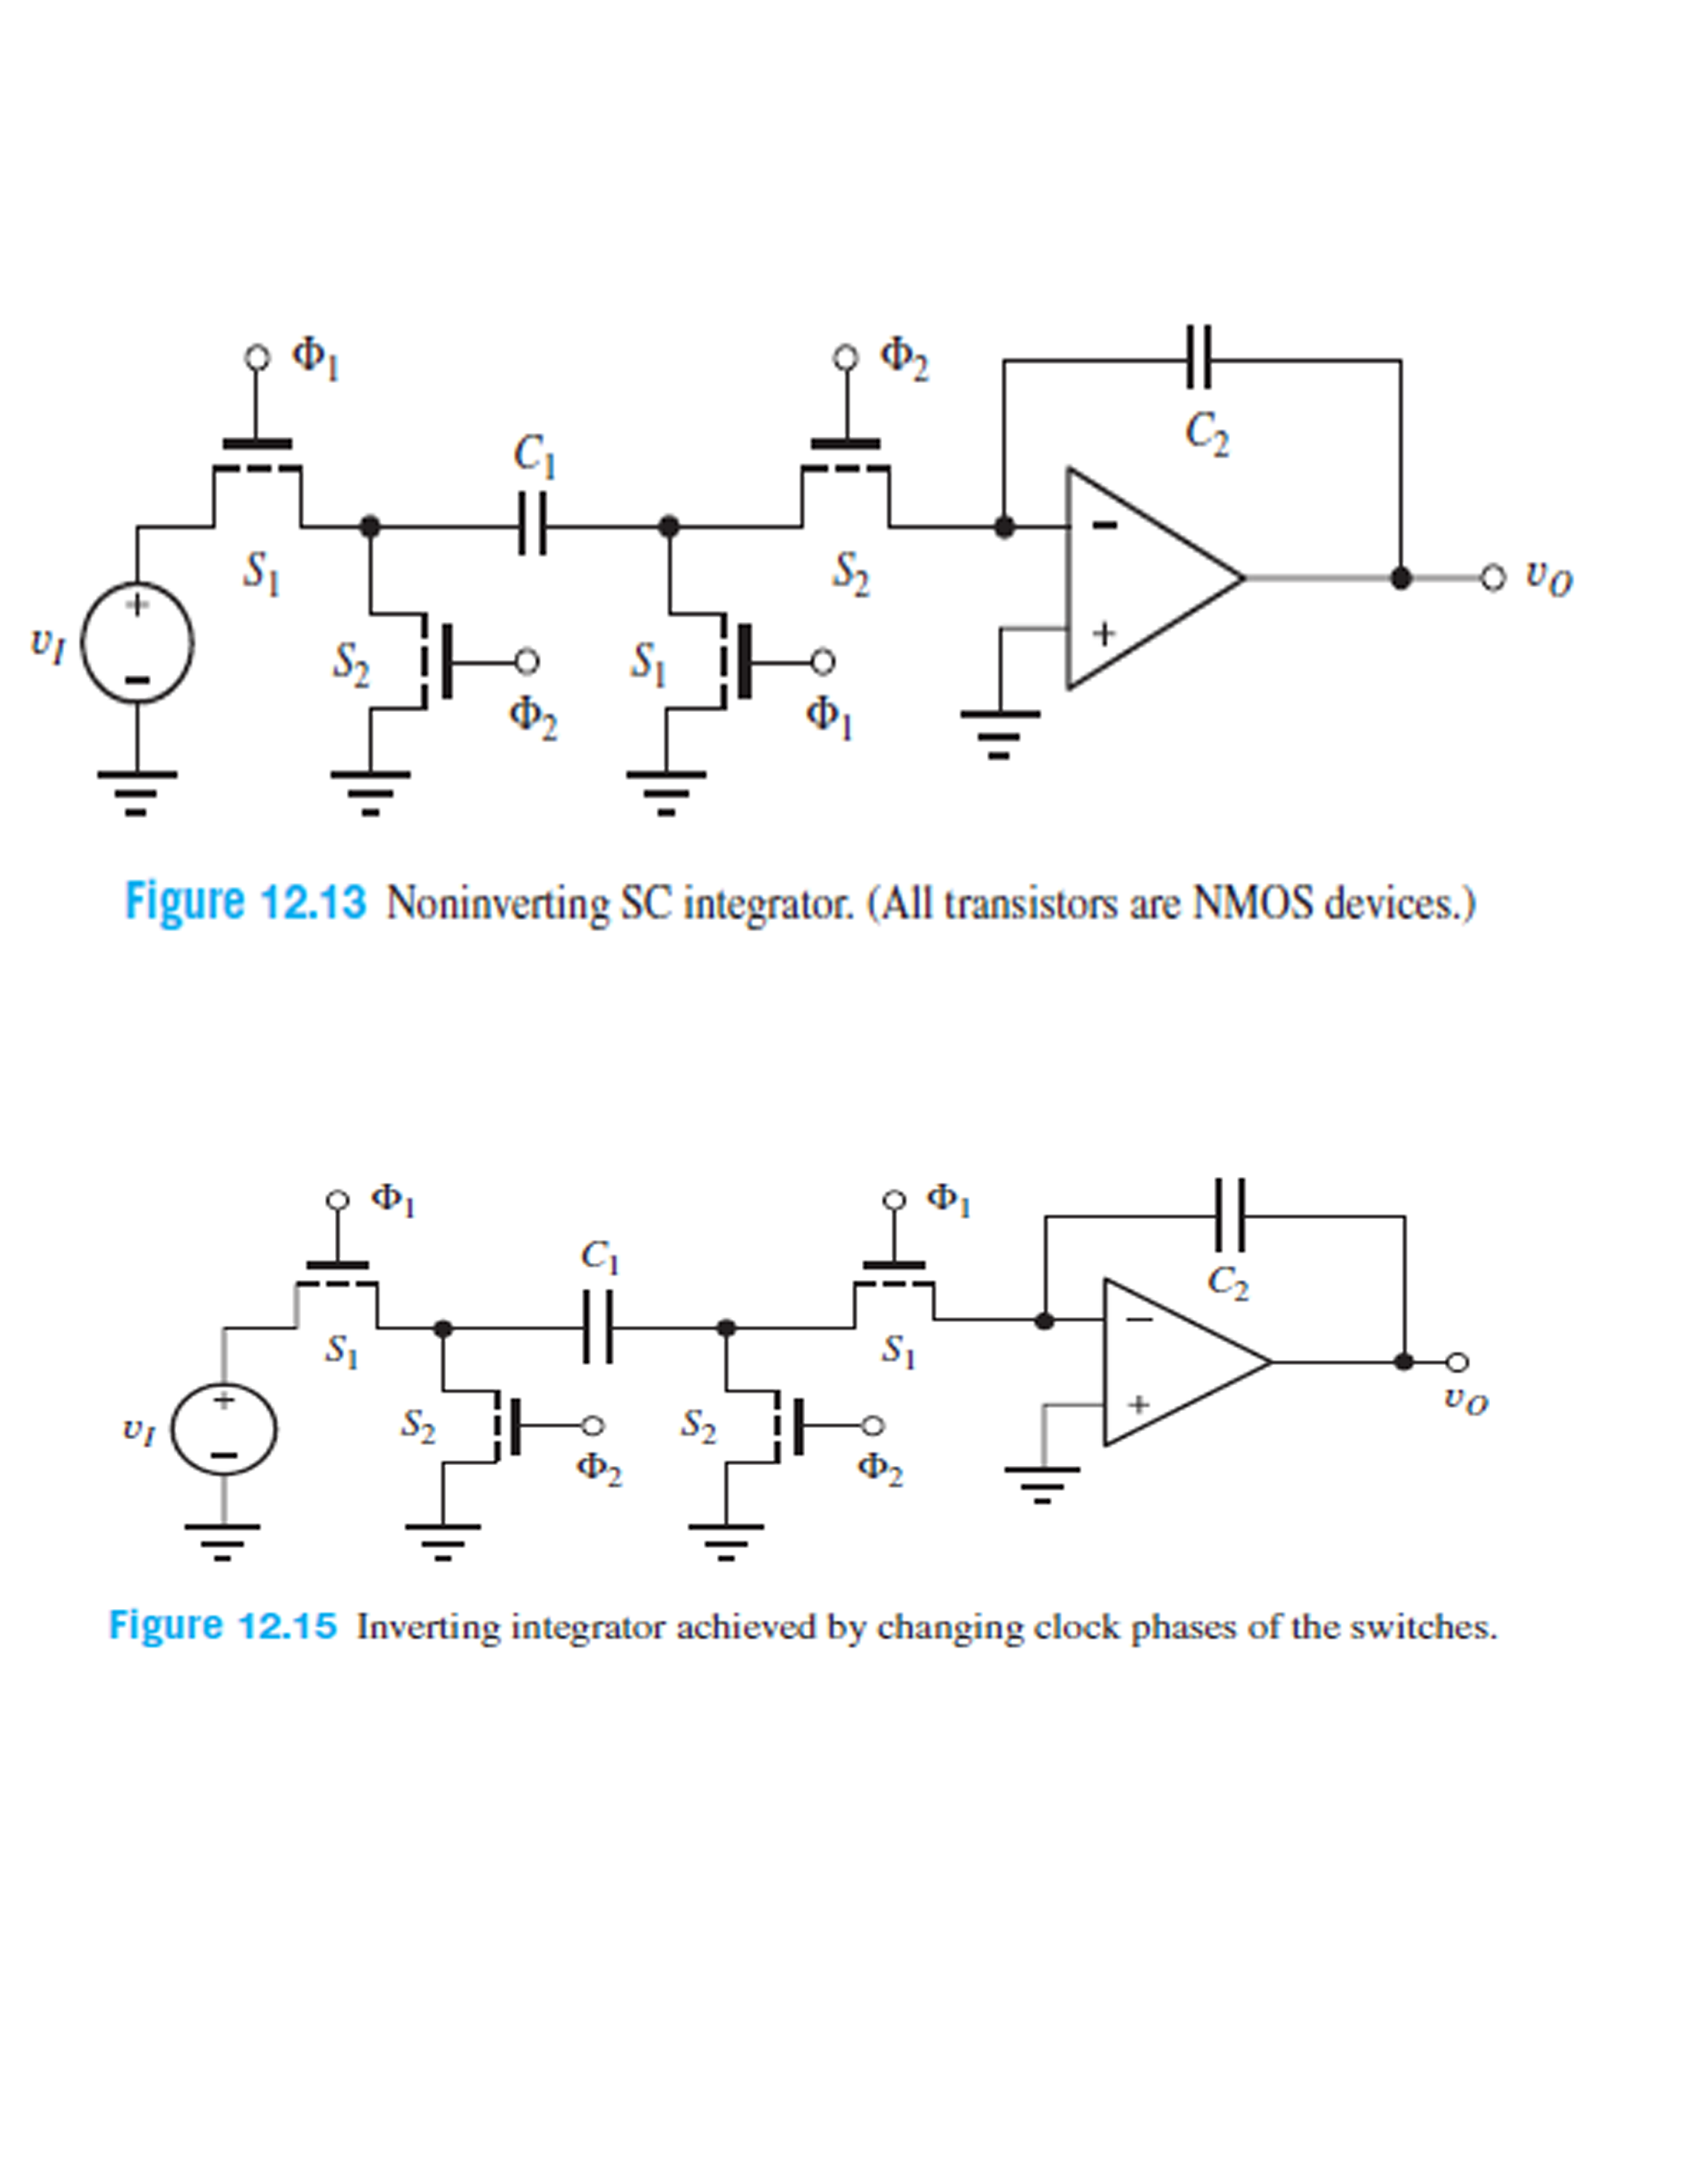 Ф.
C2
S1
S2
S2
S1
Ф1
Figure 12.13 Noninverting SC integrator. (All transistors are NMOS devices.)
Фт
Cq
C2
S1
S1
vo
S2
Ф2
S2
Figure 12.15 Inverting integrator achieved by changing clock phases of the switches.
